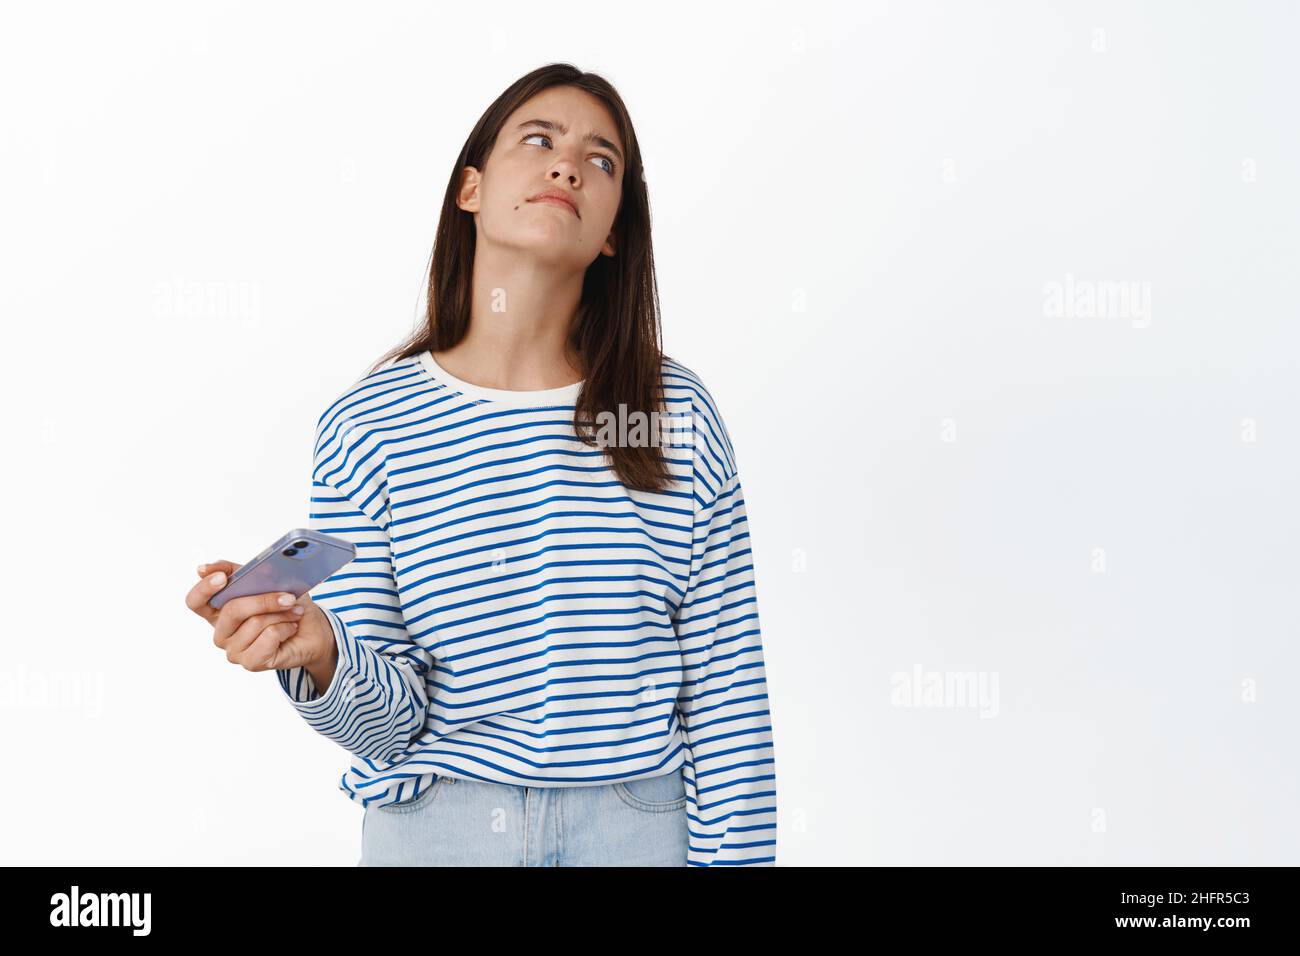 Sad and disappointed girl holding smartphone, losing in video game, sighing upset and looking away, standing uneasy against white background Stock Photo